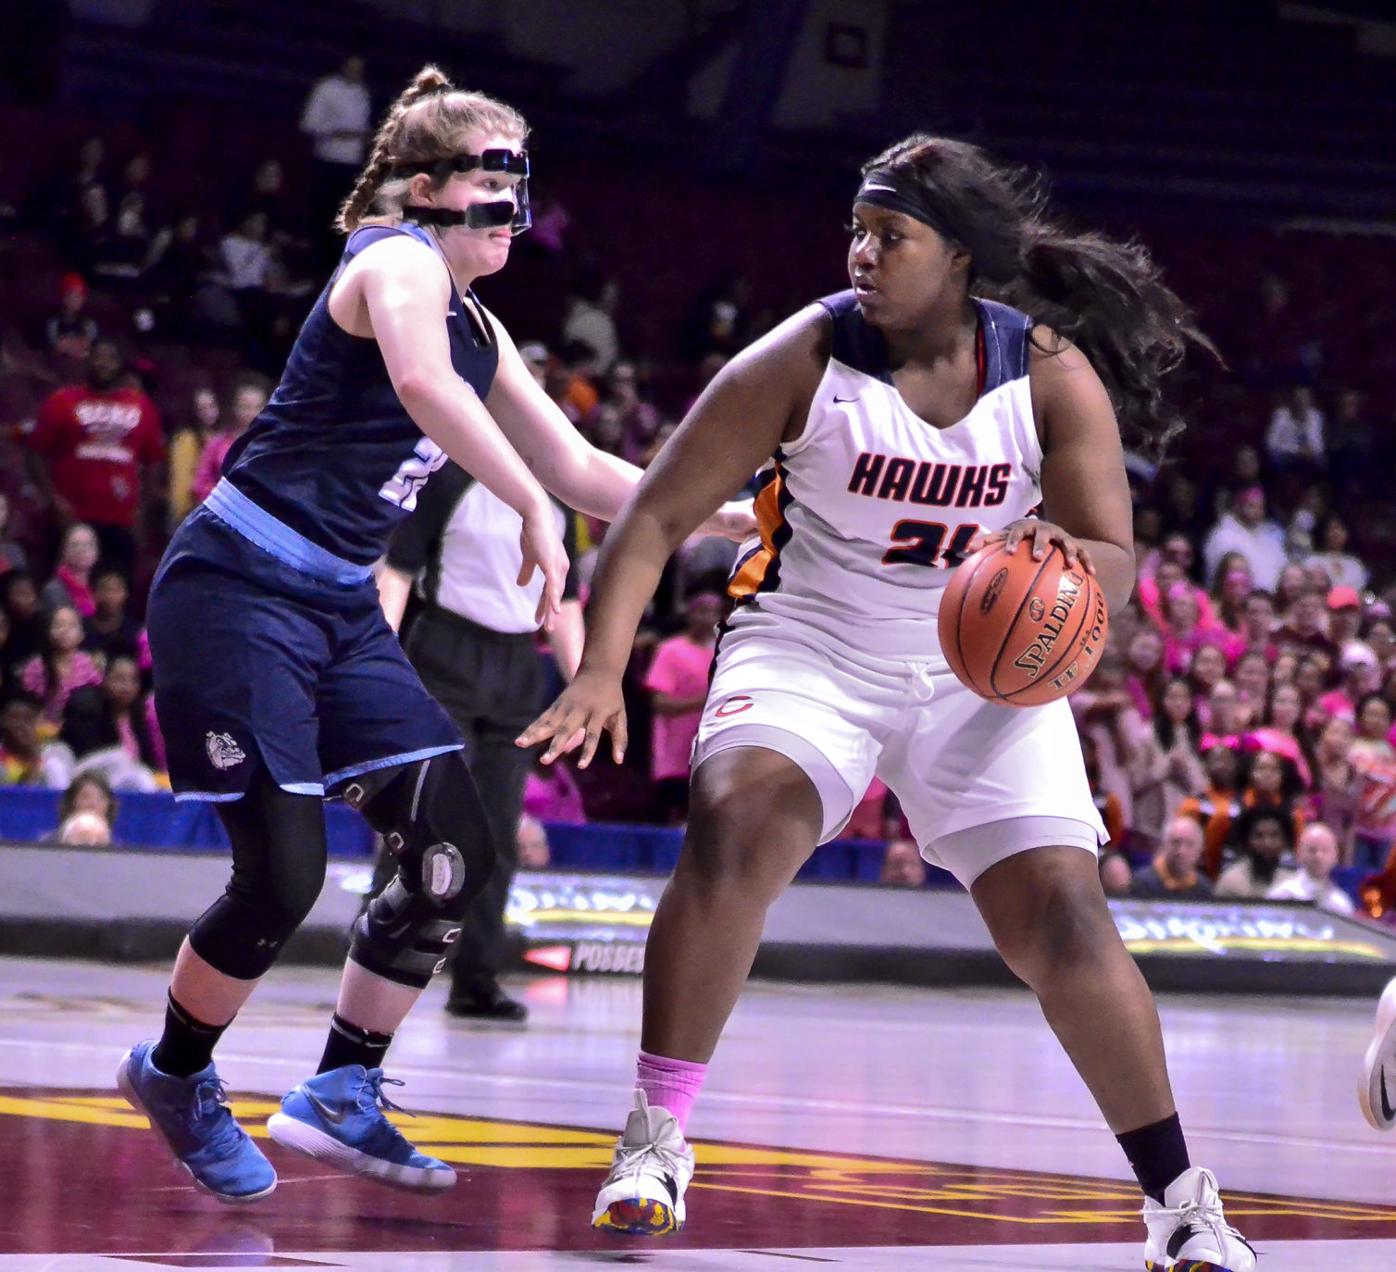 Robbinsdale Cooper girls basketball: Hawks move up a class, hire ...